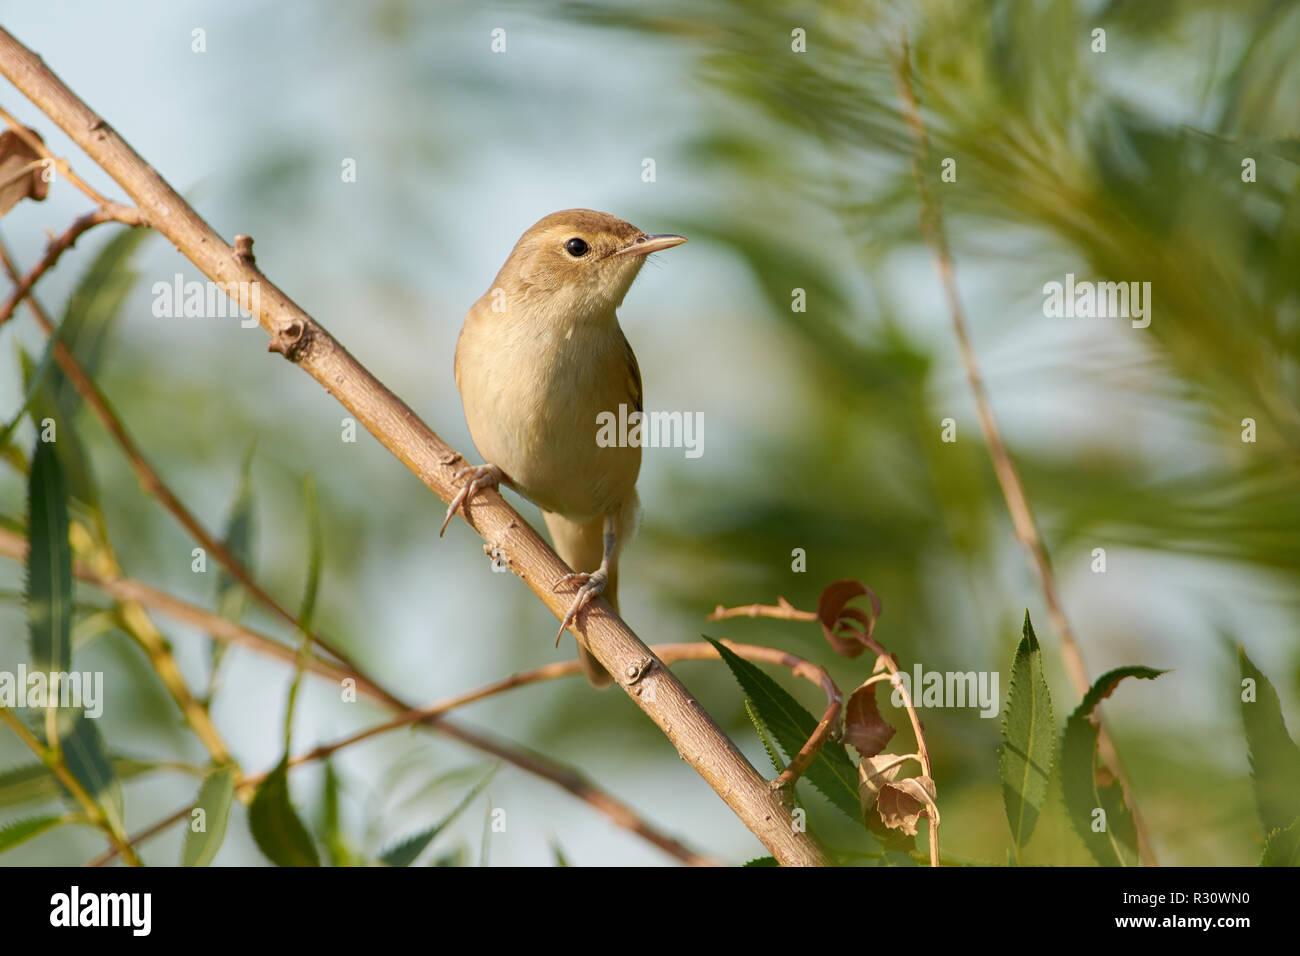 Marsh warbler (Acrocephalus palustris) bird sits on a thin branch of a weeping willow, near the nest. Stock Photo